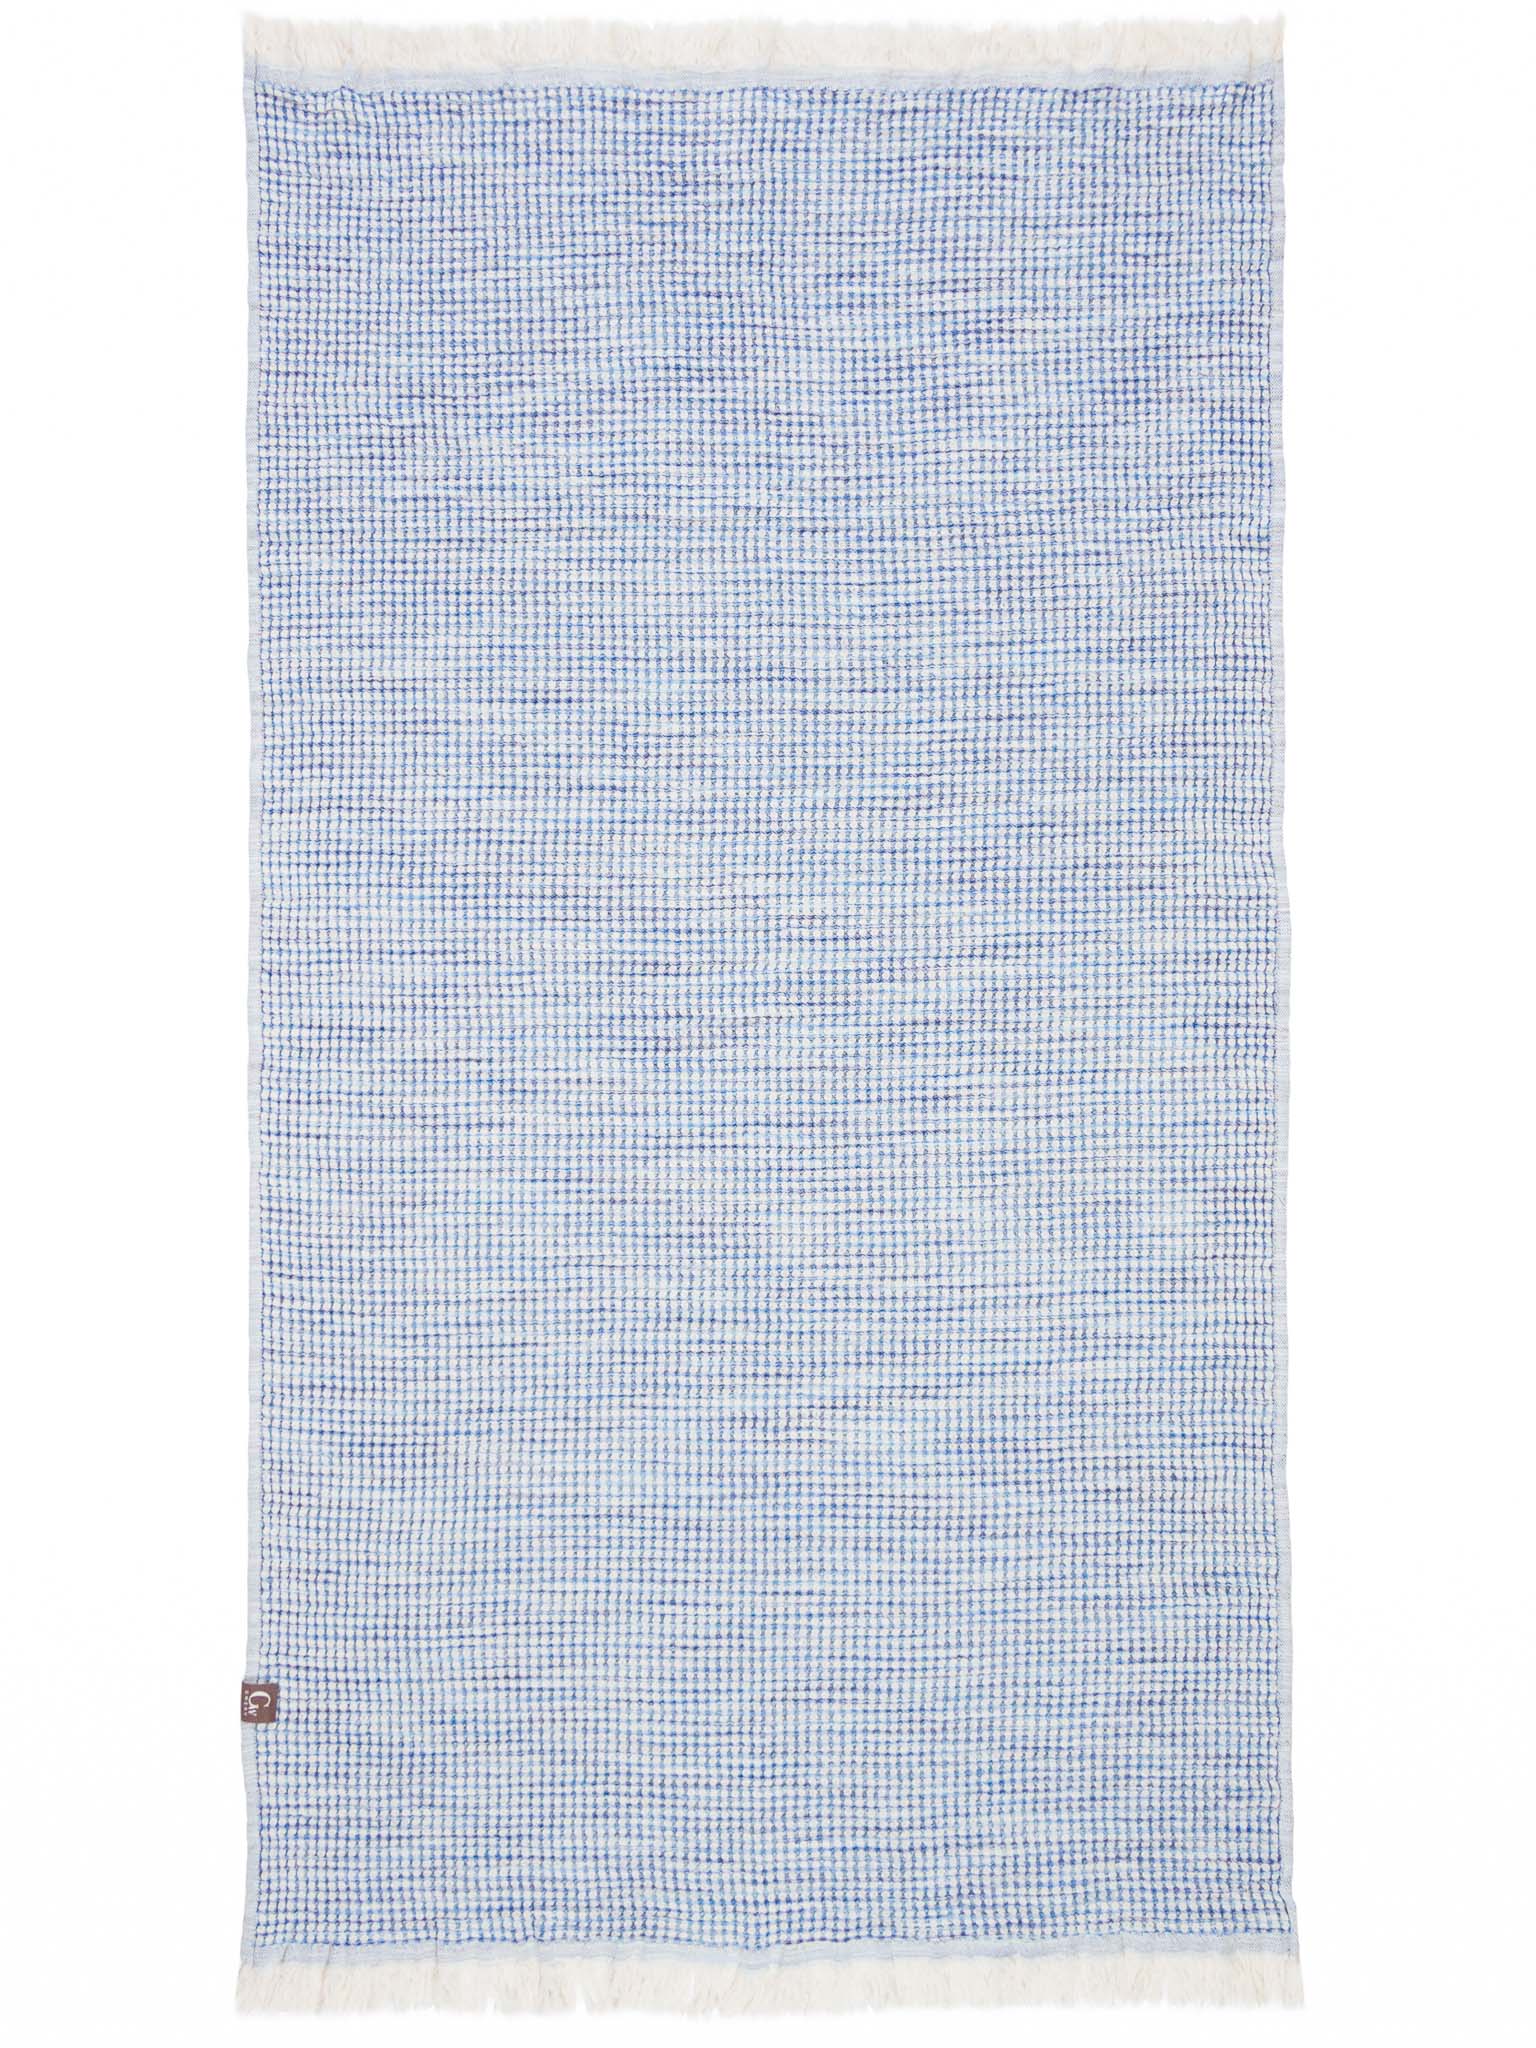 Blue patterned, double sided, honeycomb beach towel open up